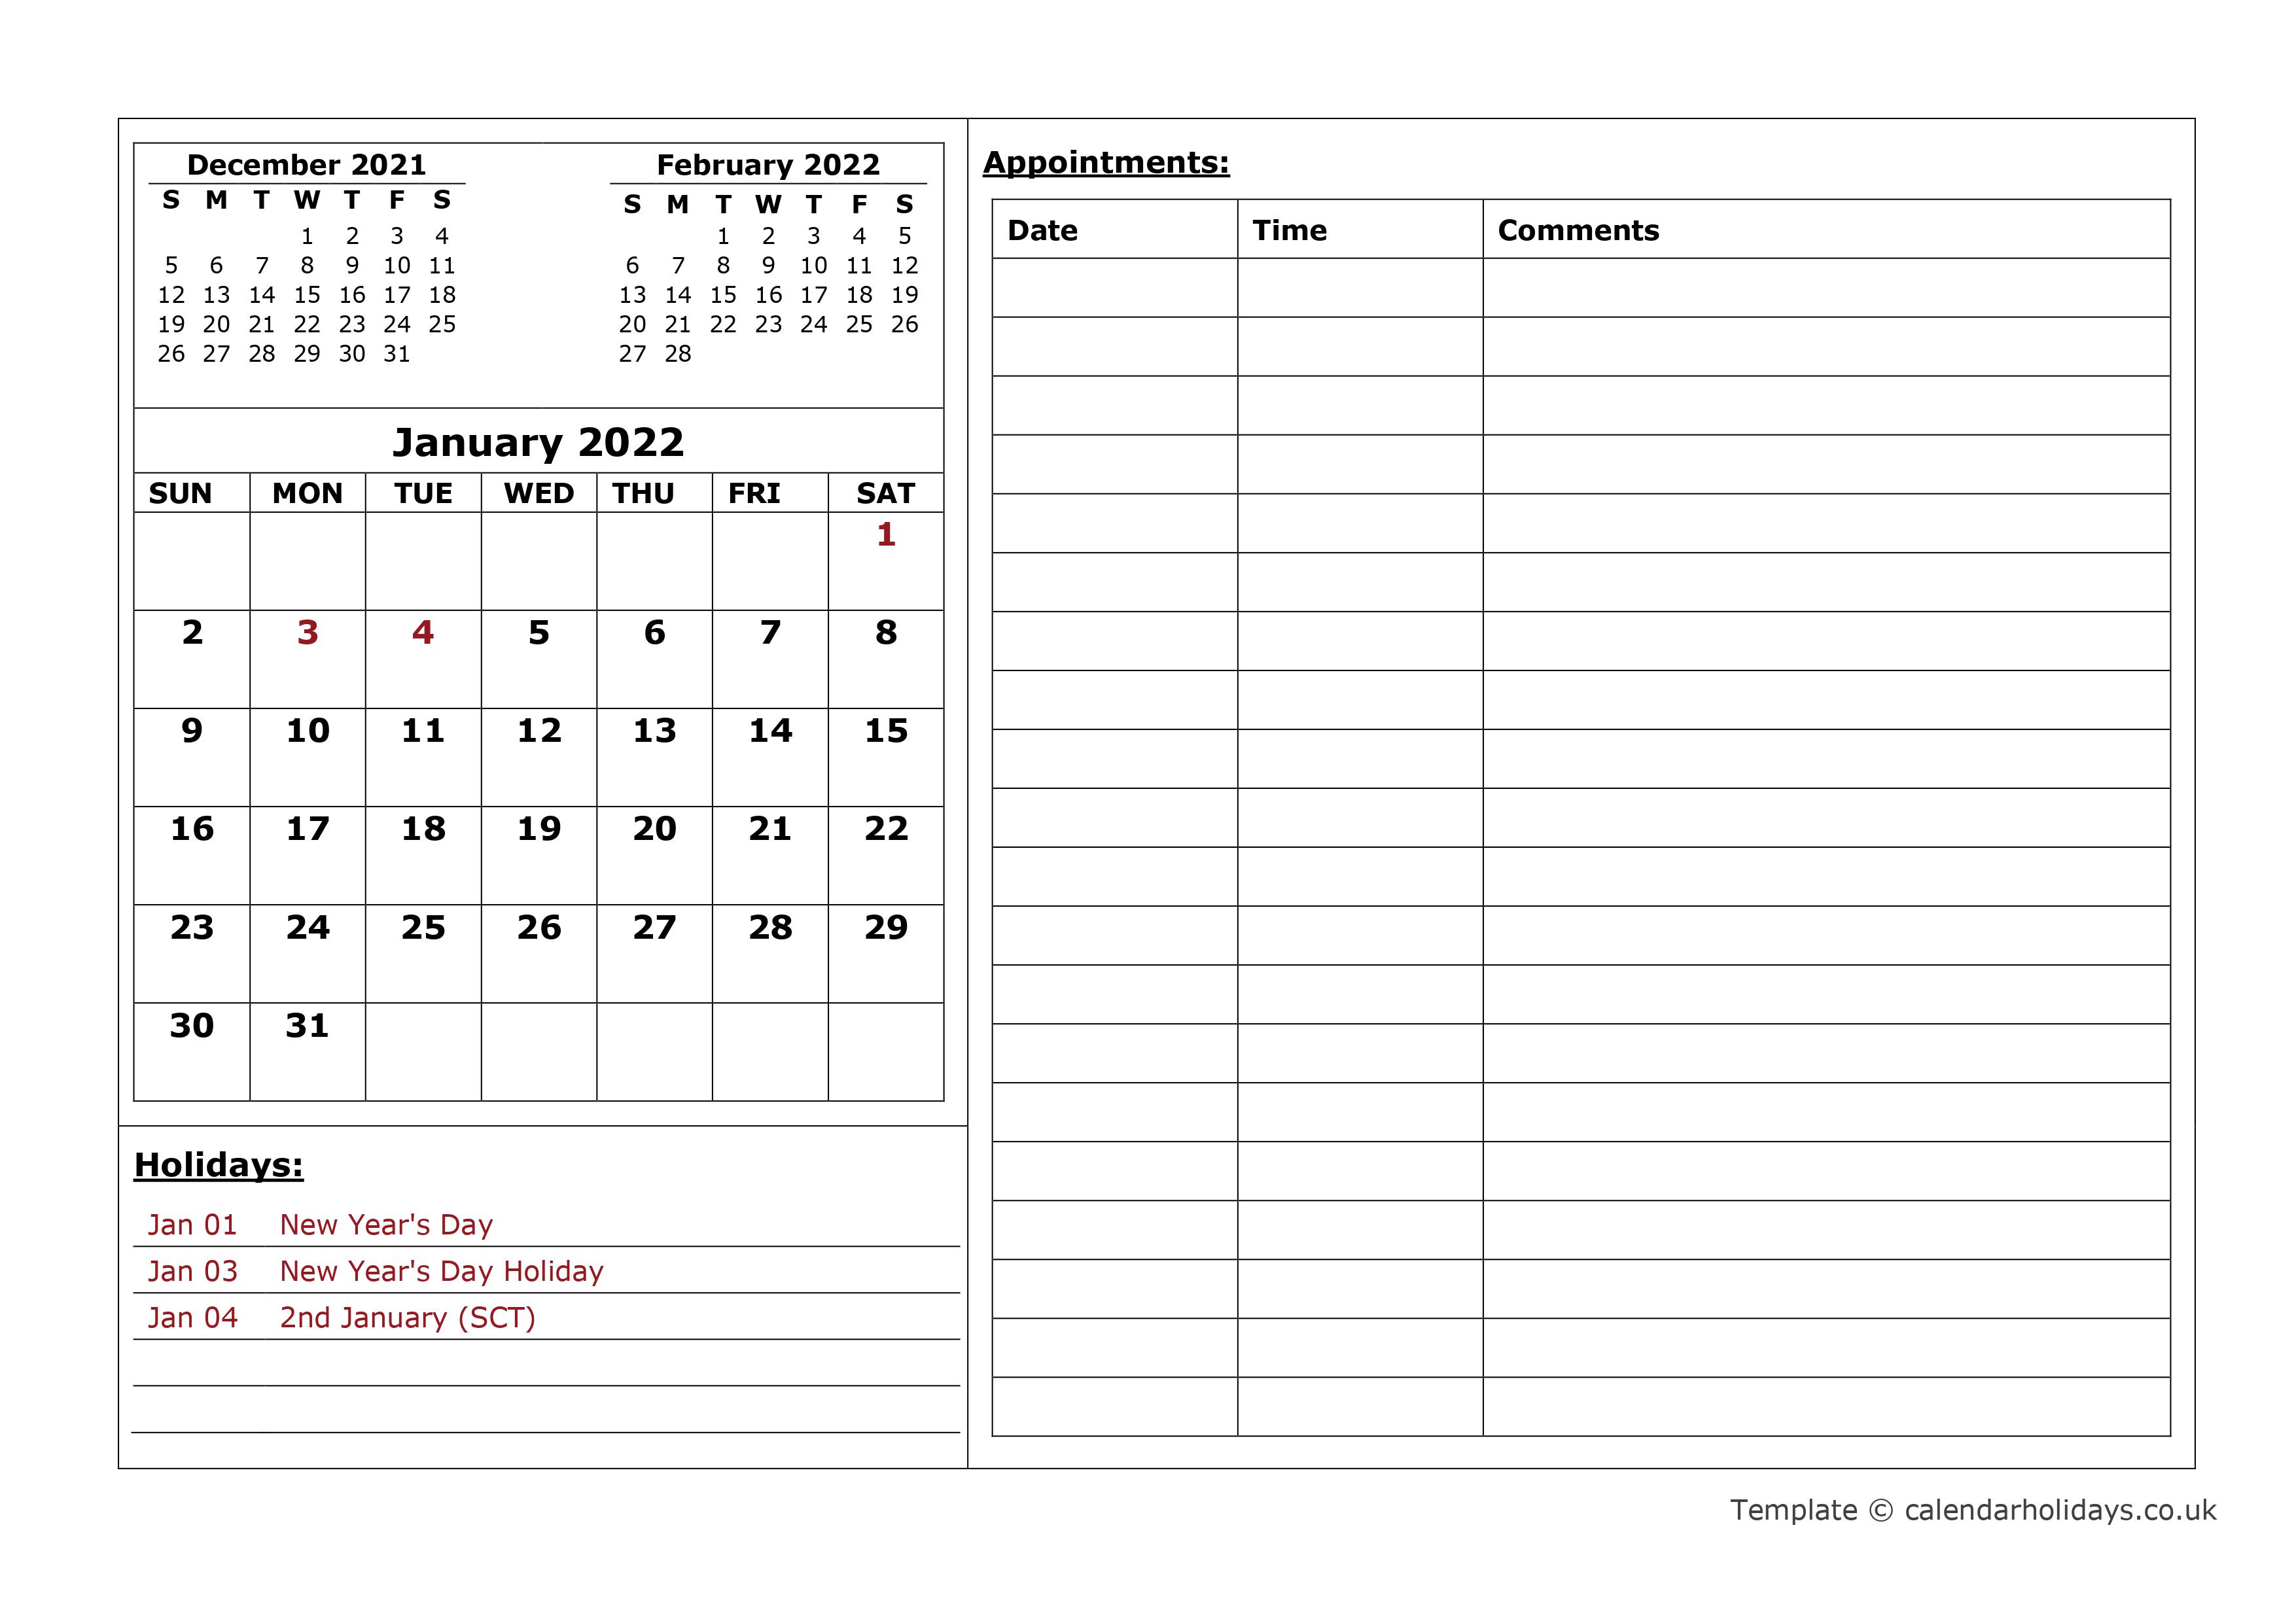 Free Printable Appointment Calendar 2022 2022 Monthly Template - Calendarholidays.co.uk